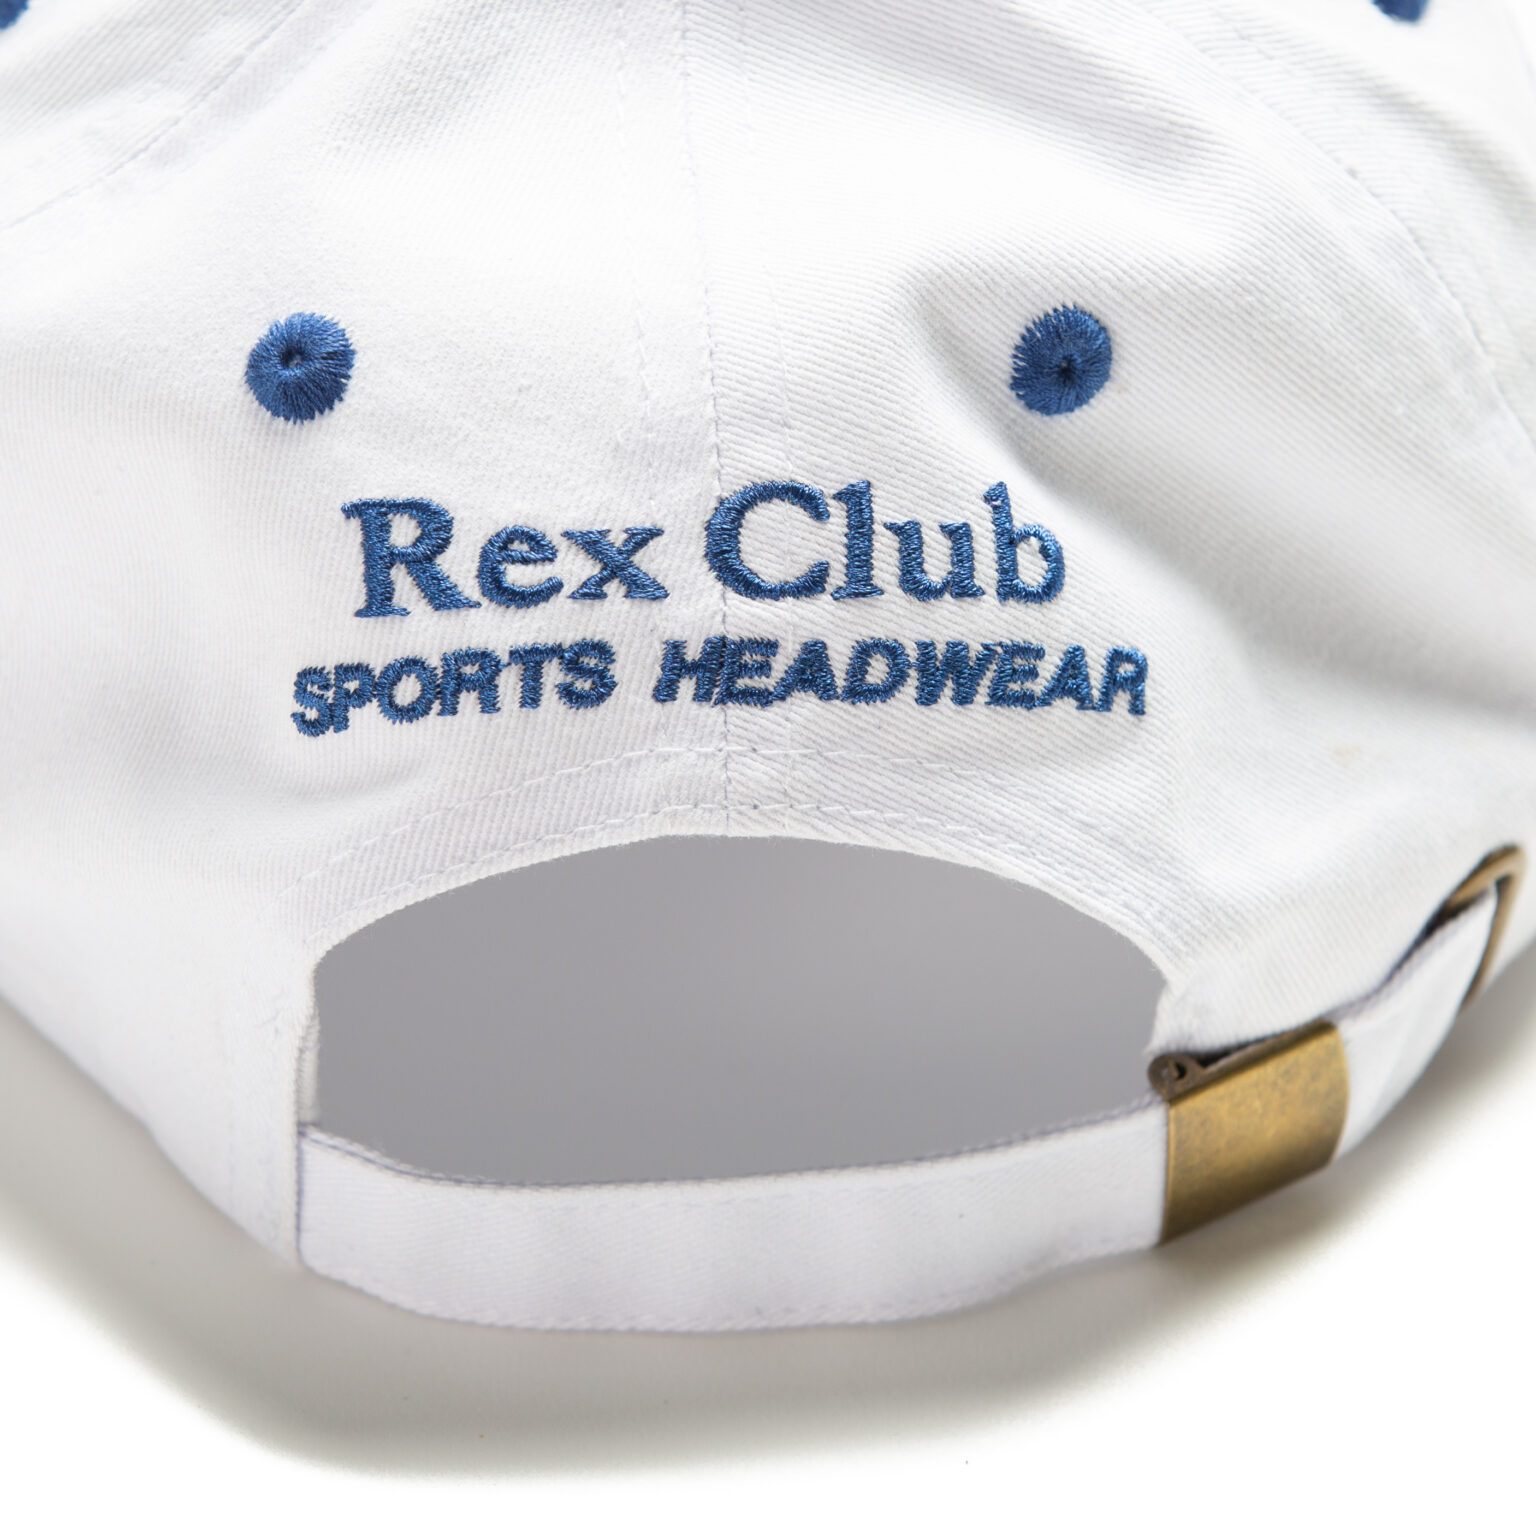 Rex Club | The image shows the back of a white baseball cap with blue embroidered text that reads "Rex Club - Summer 24 - Slouch." The cap has a brass buckle on an adjustable strap and two blue ventilation holes on either side of the text. | Custom Caps | Custom Hats | Team Headwear | UK